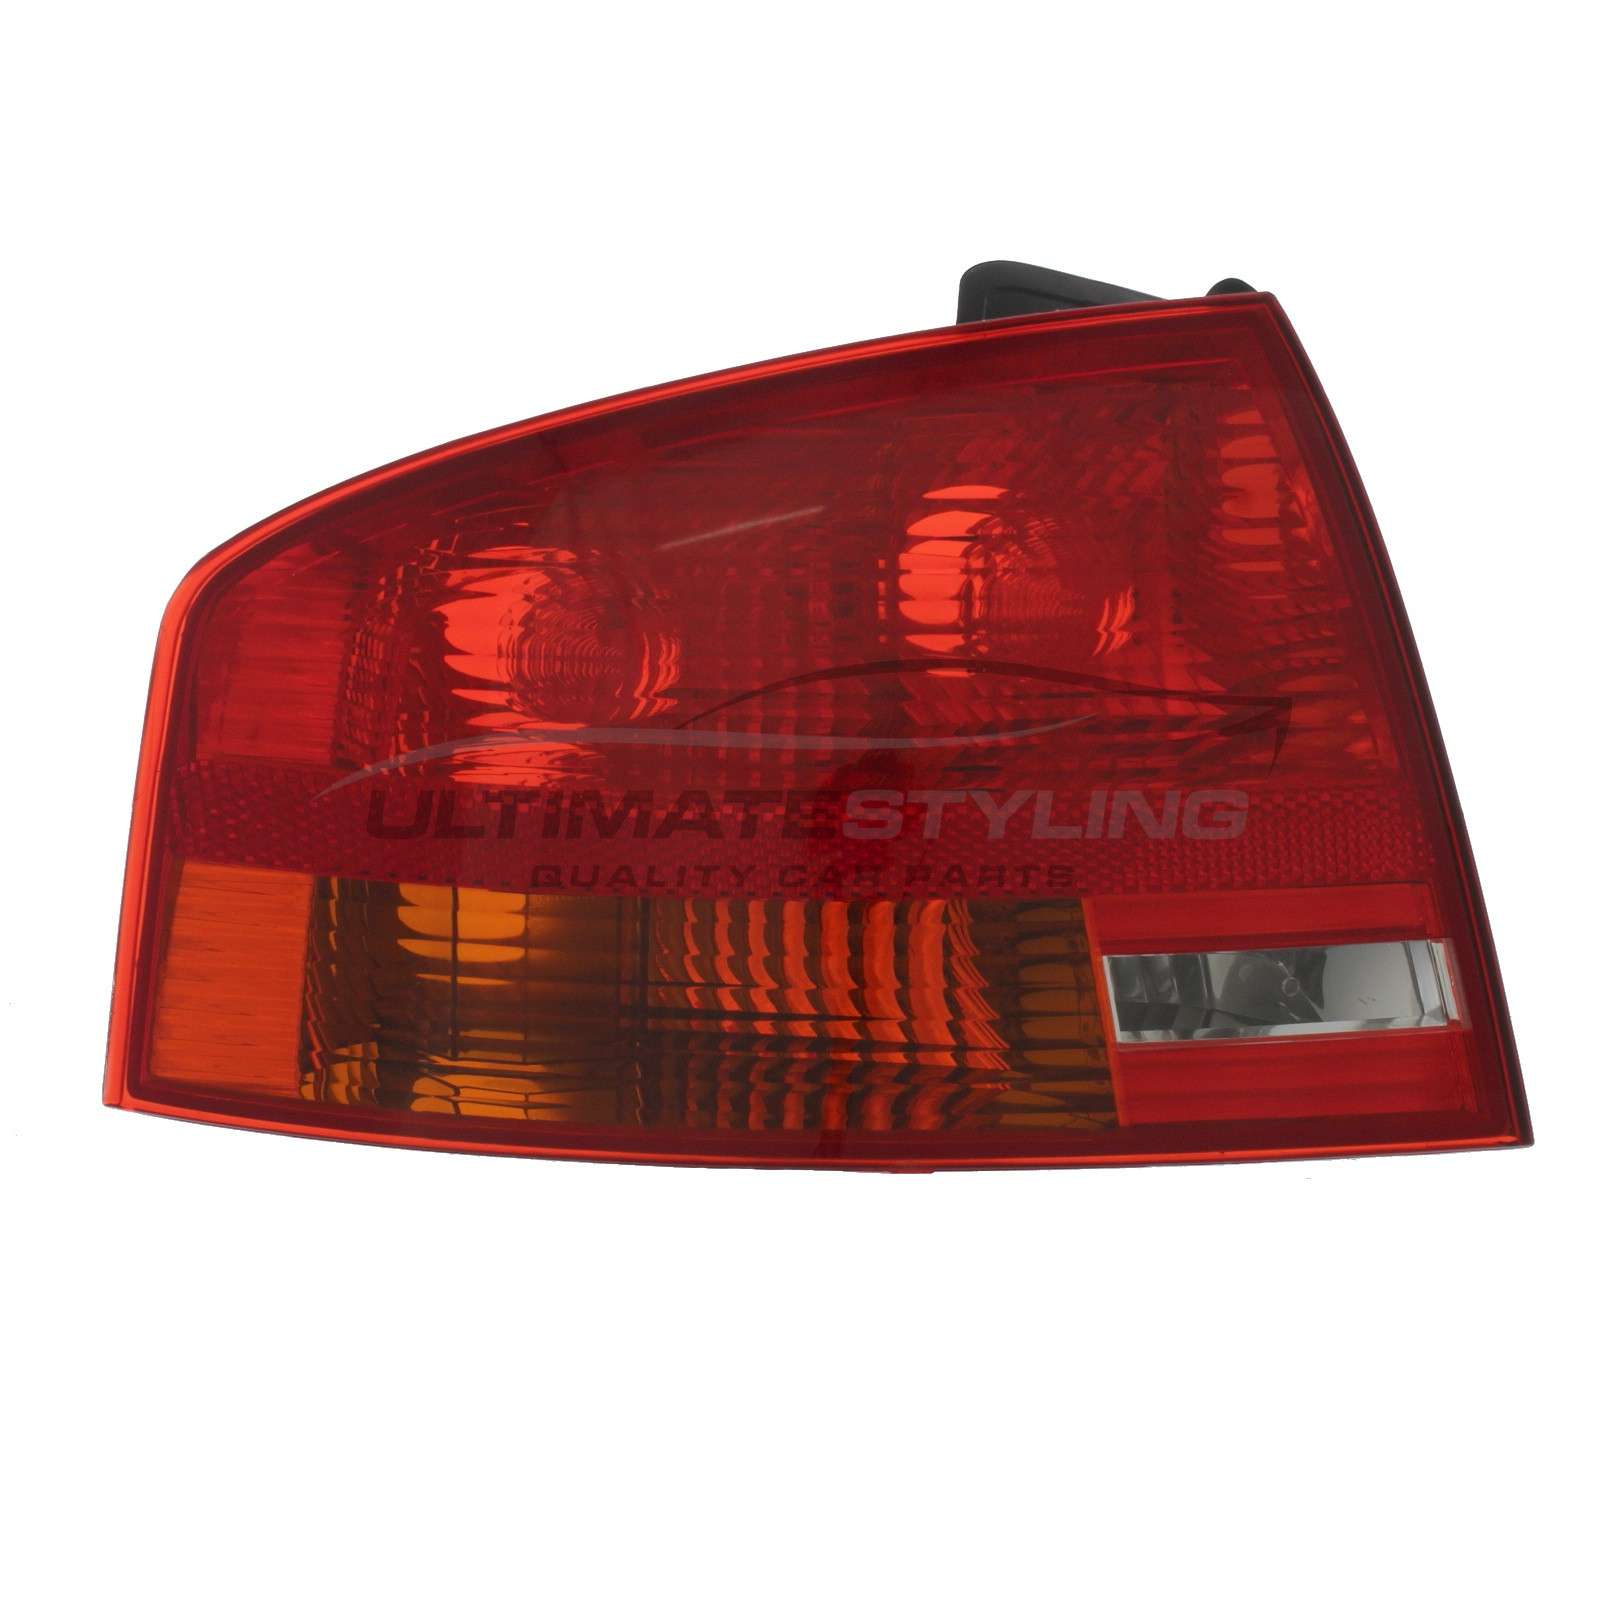 Audi A4 2004-2008 / Audi RS4 2005-2007 / Audi S4 2004-2008 Non-LED Outer (Wing) Rear Light / Tail Light Excluding Bulb Holder Passenger Side (LH)